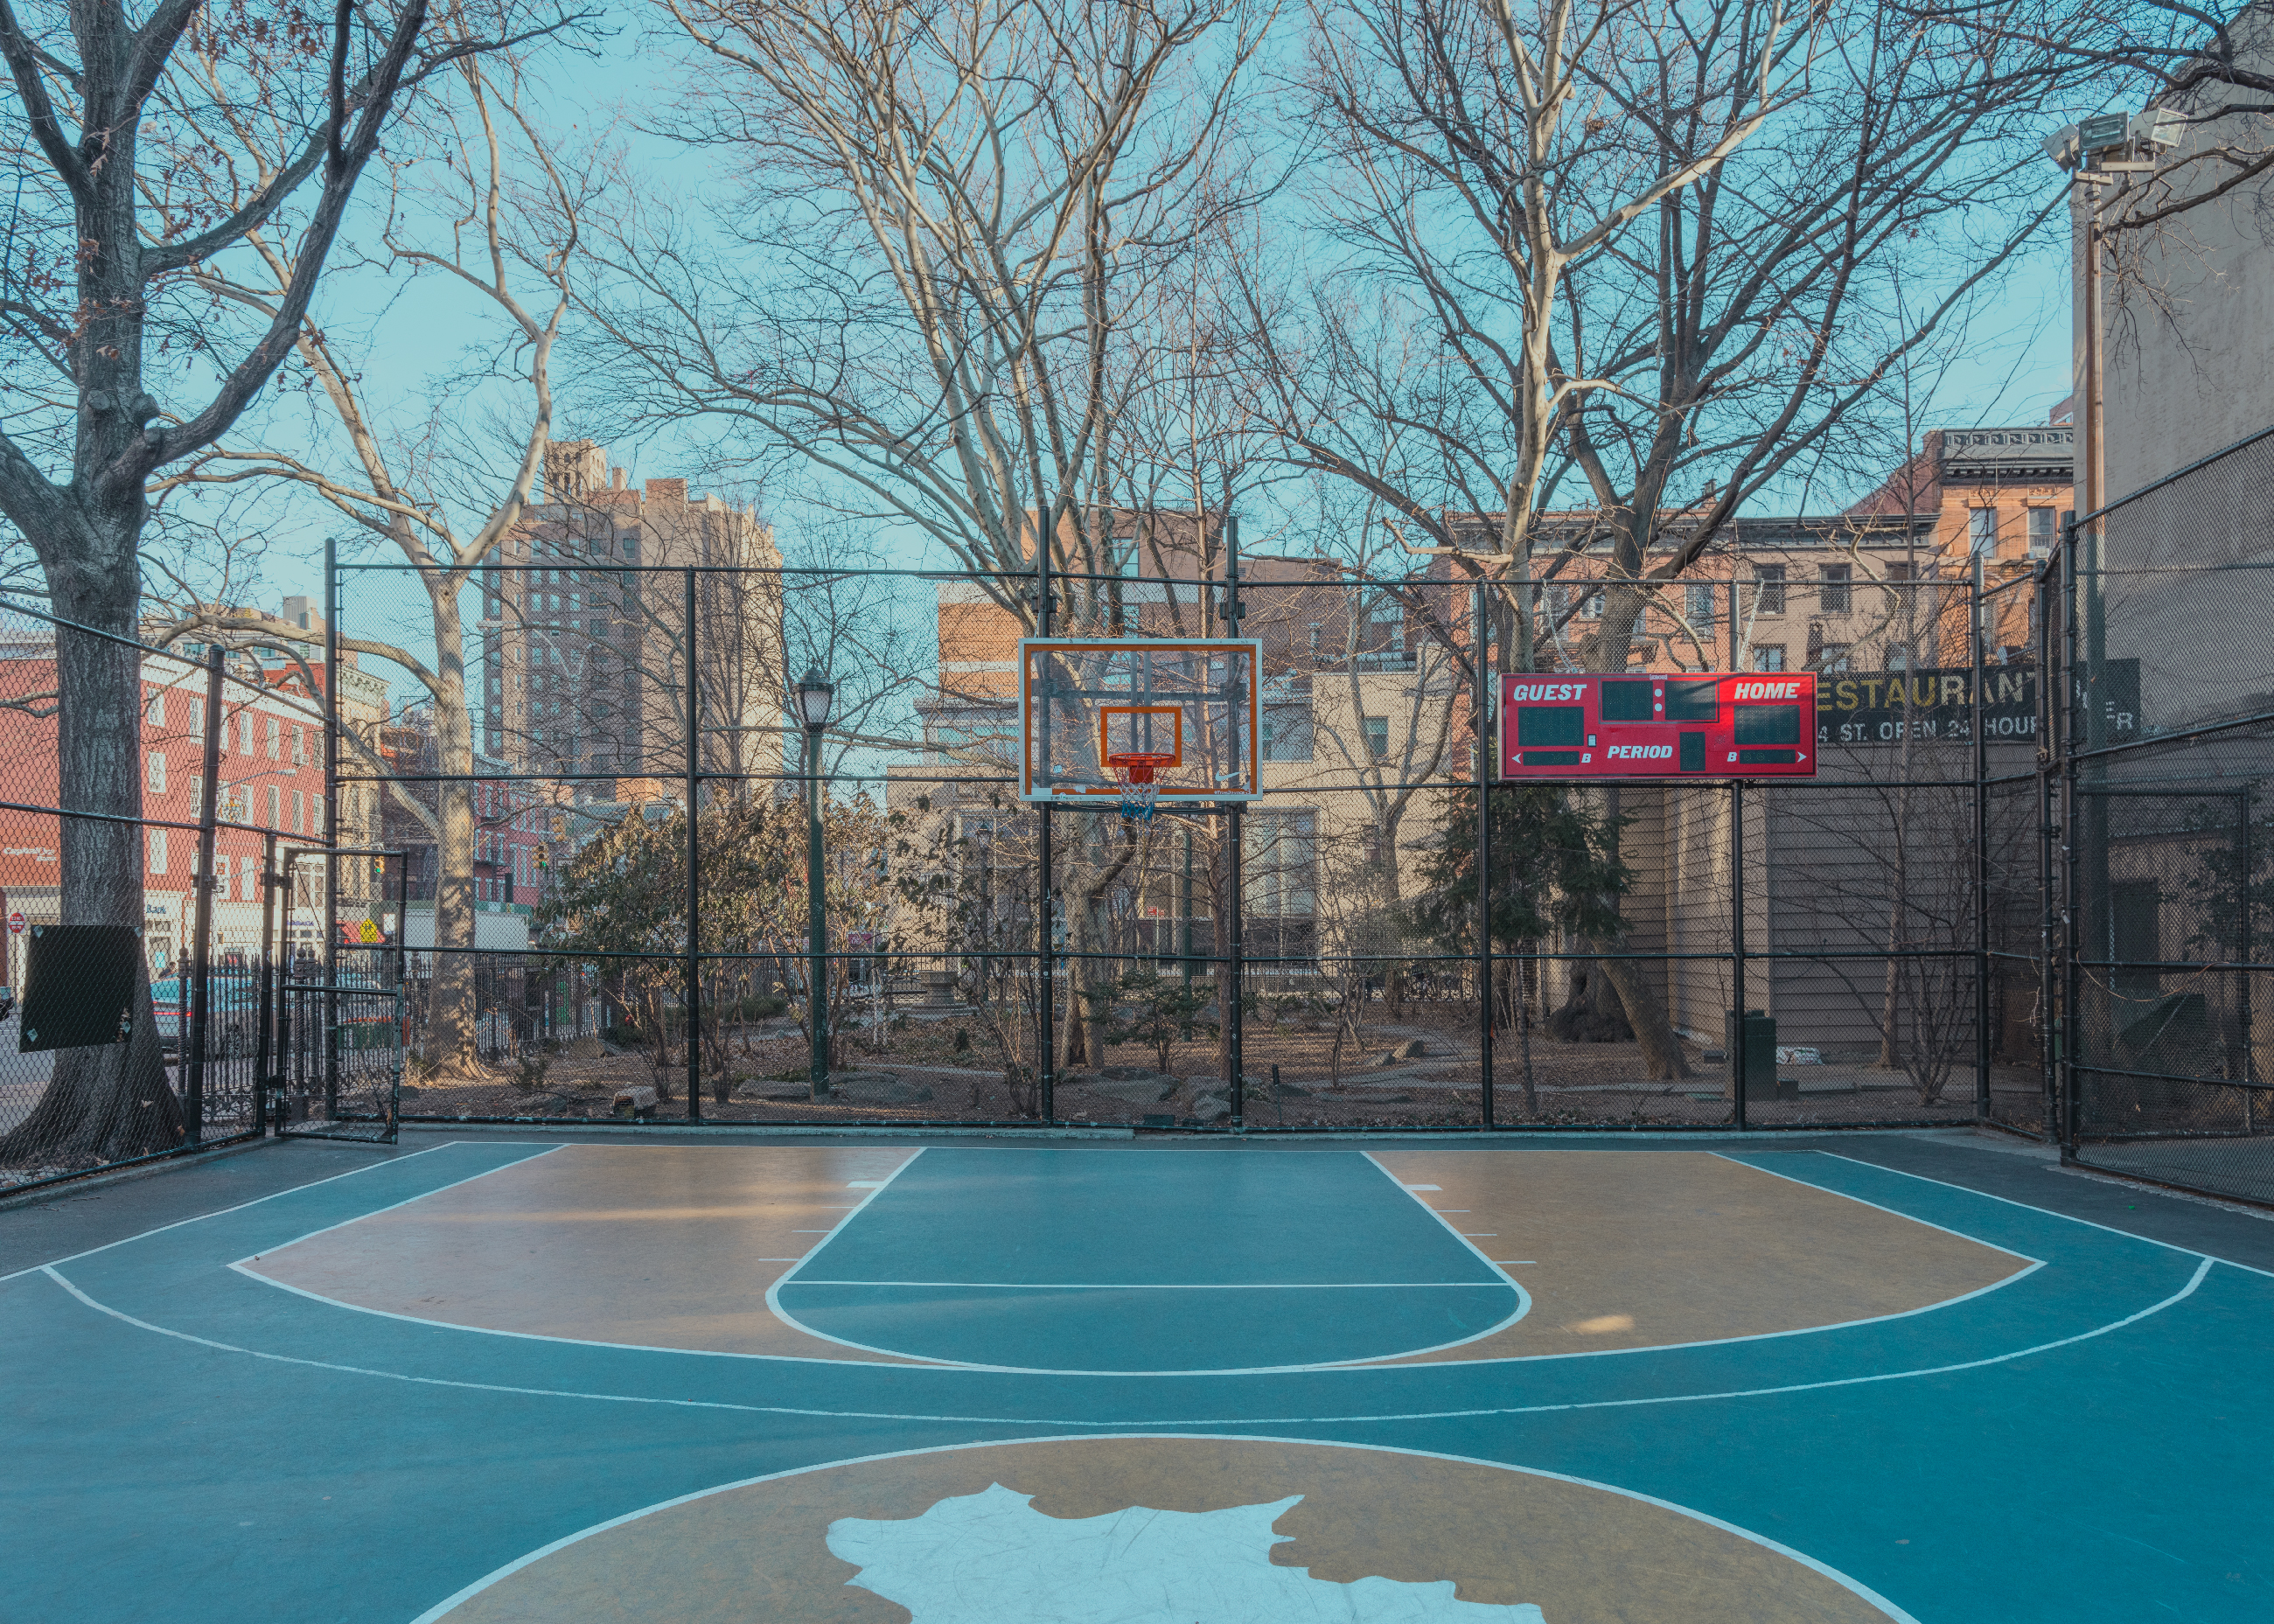 5 best outdoor basketball courts in New York